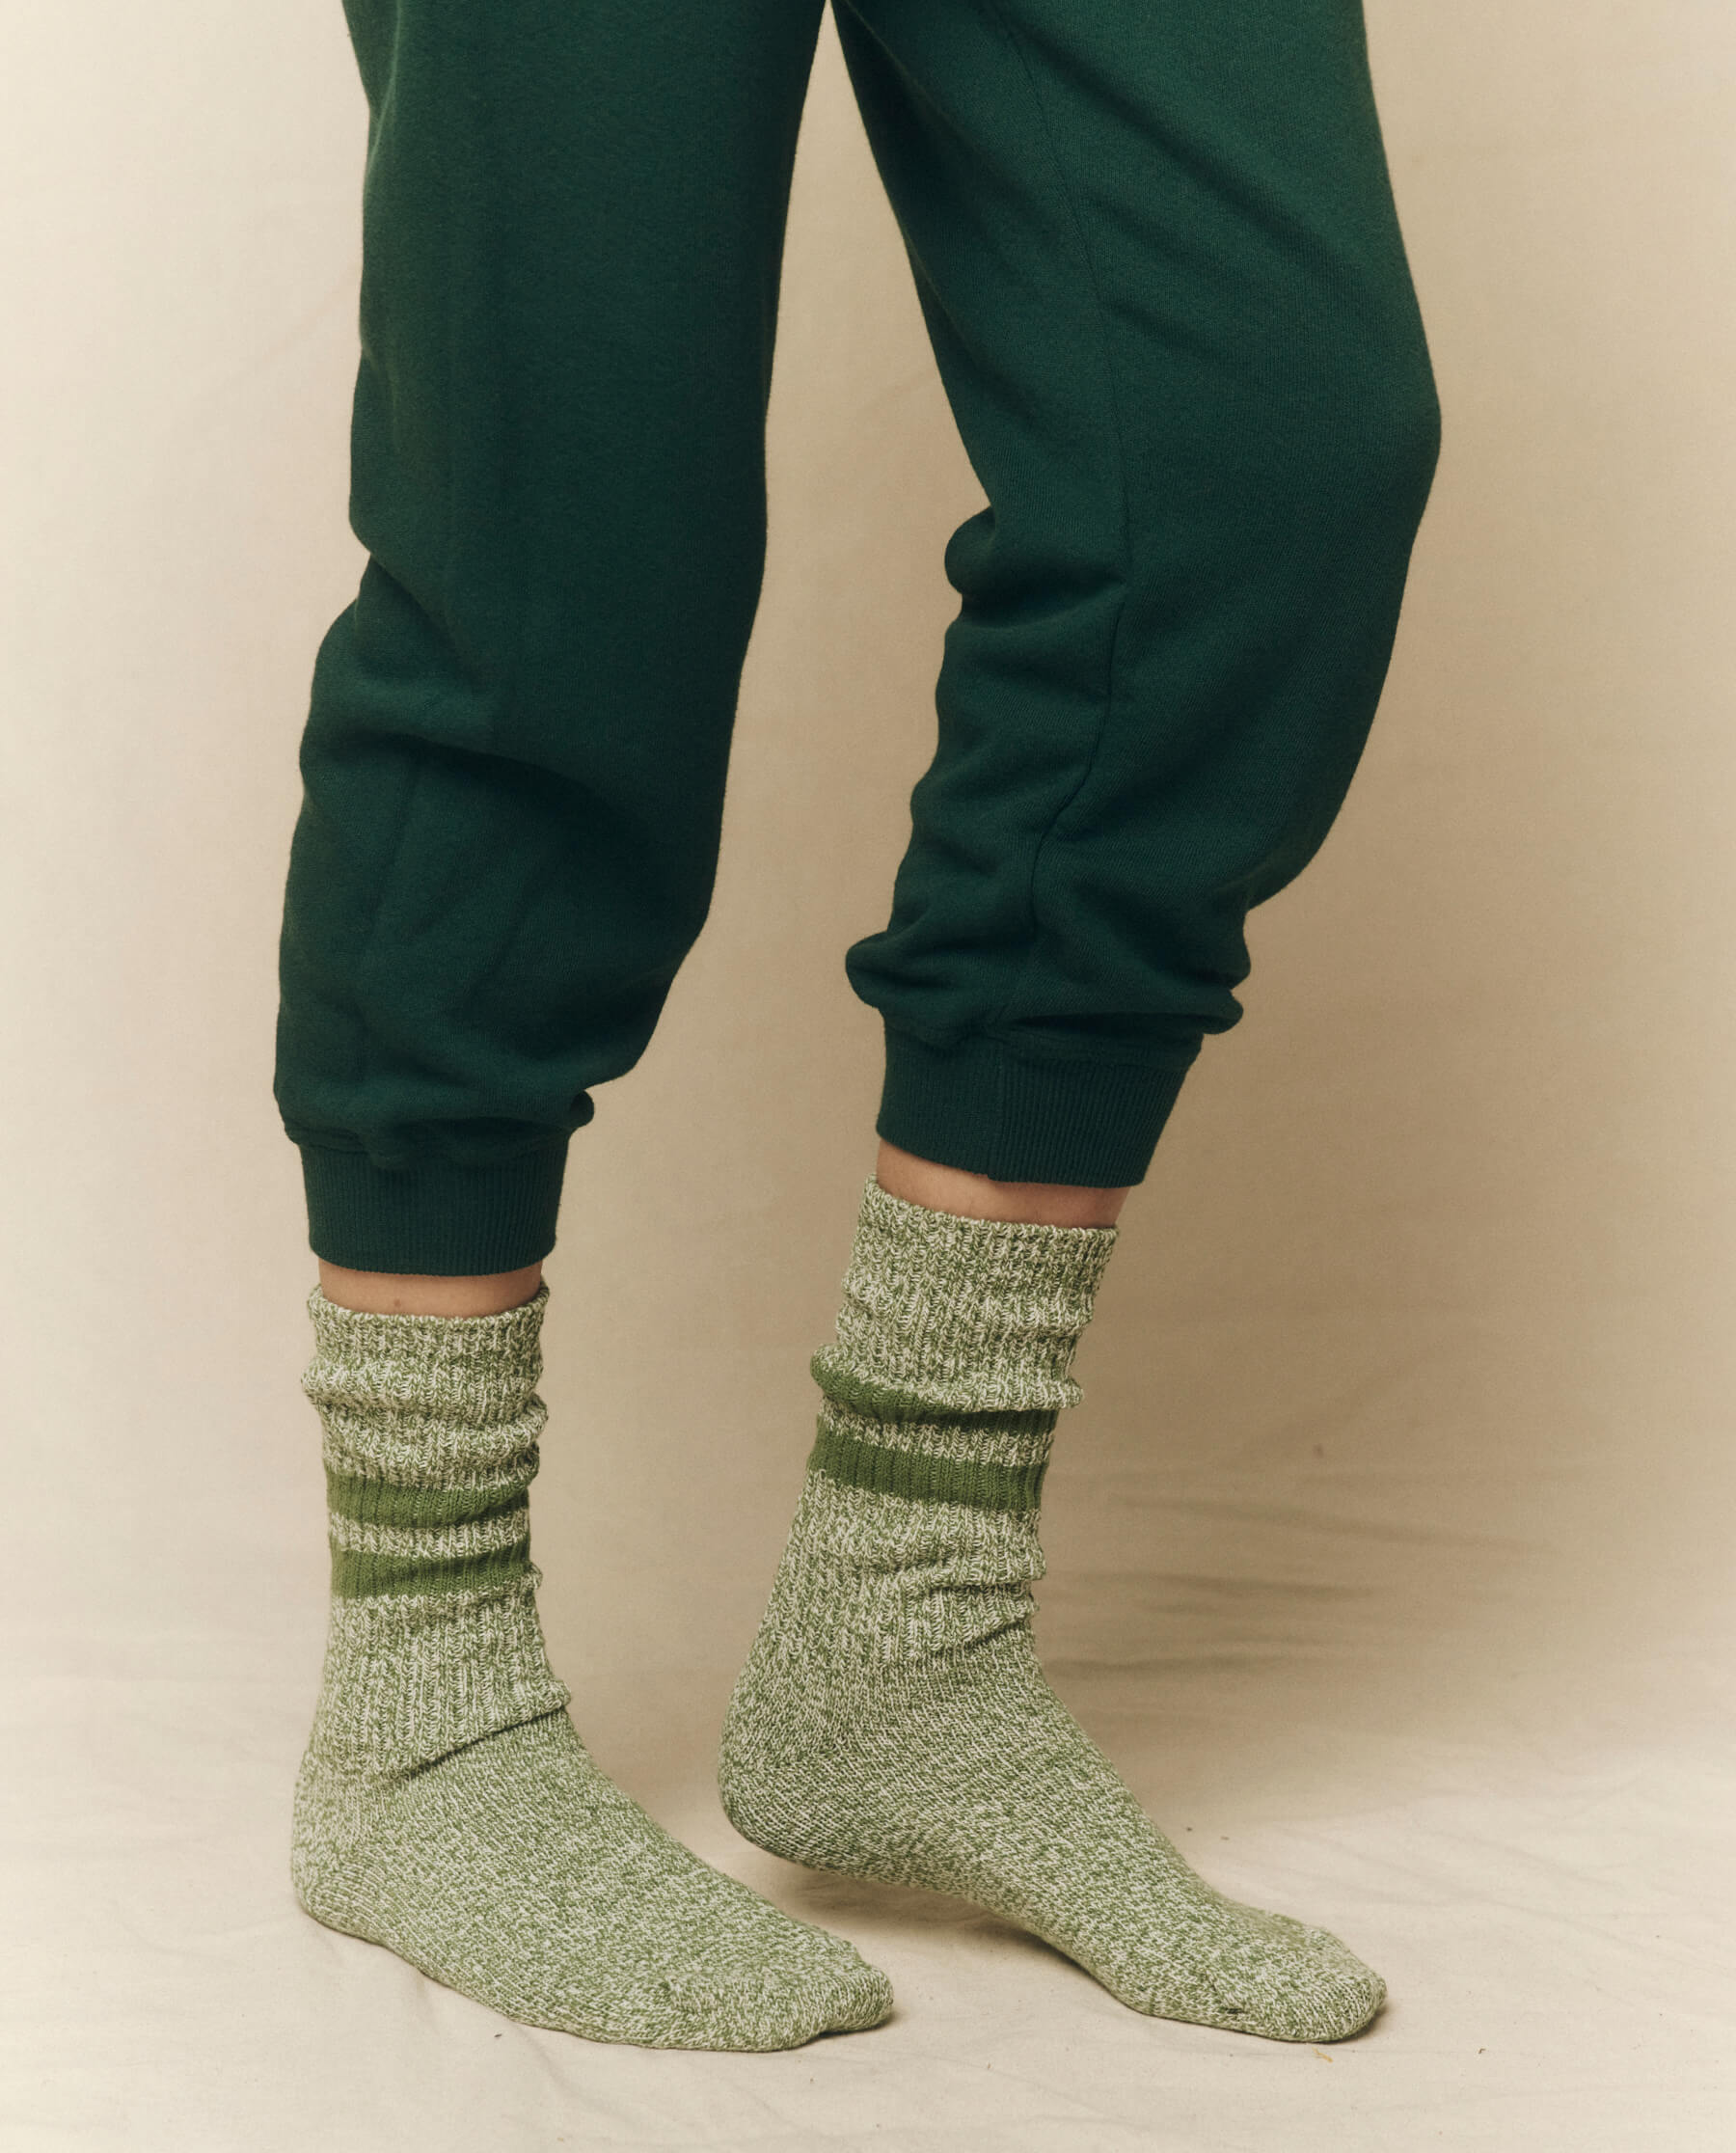 The Marled Athletic Sock. -- Army ACCESSORIES THE GREAT. FALL 23 ACCESSORIES